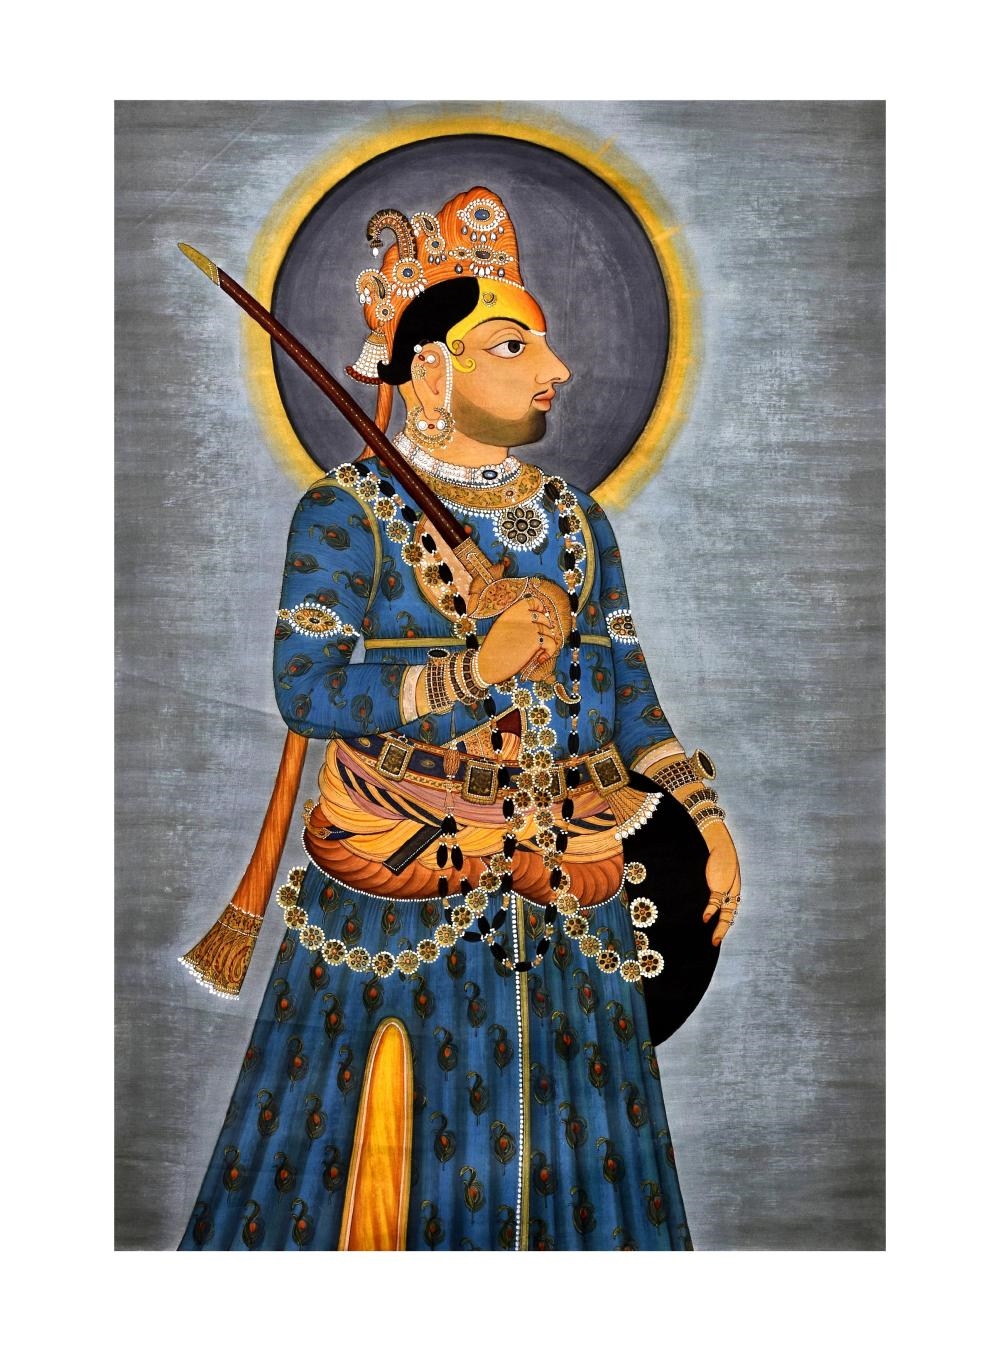 AN EXTREMELY FINE LARGE PORTRAIT OF A RULER ON CLOTH - Indian School, 19th Century